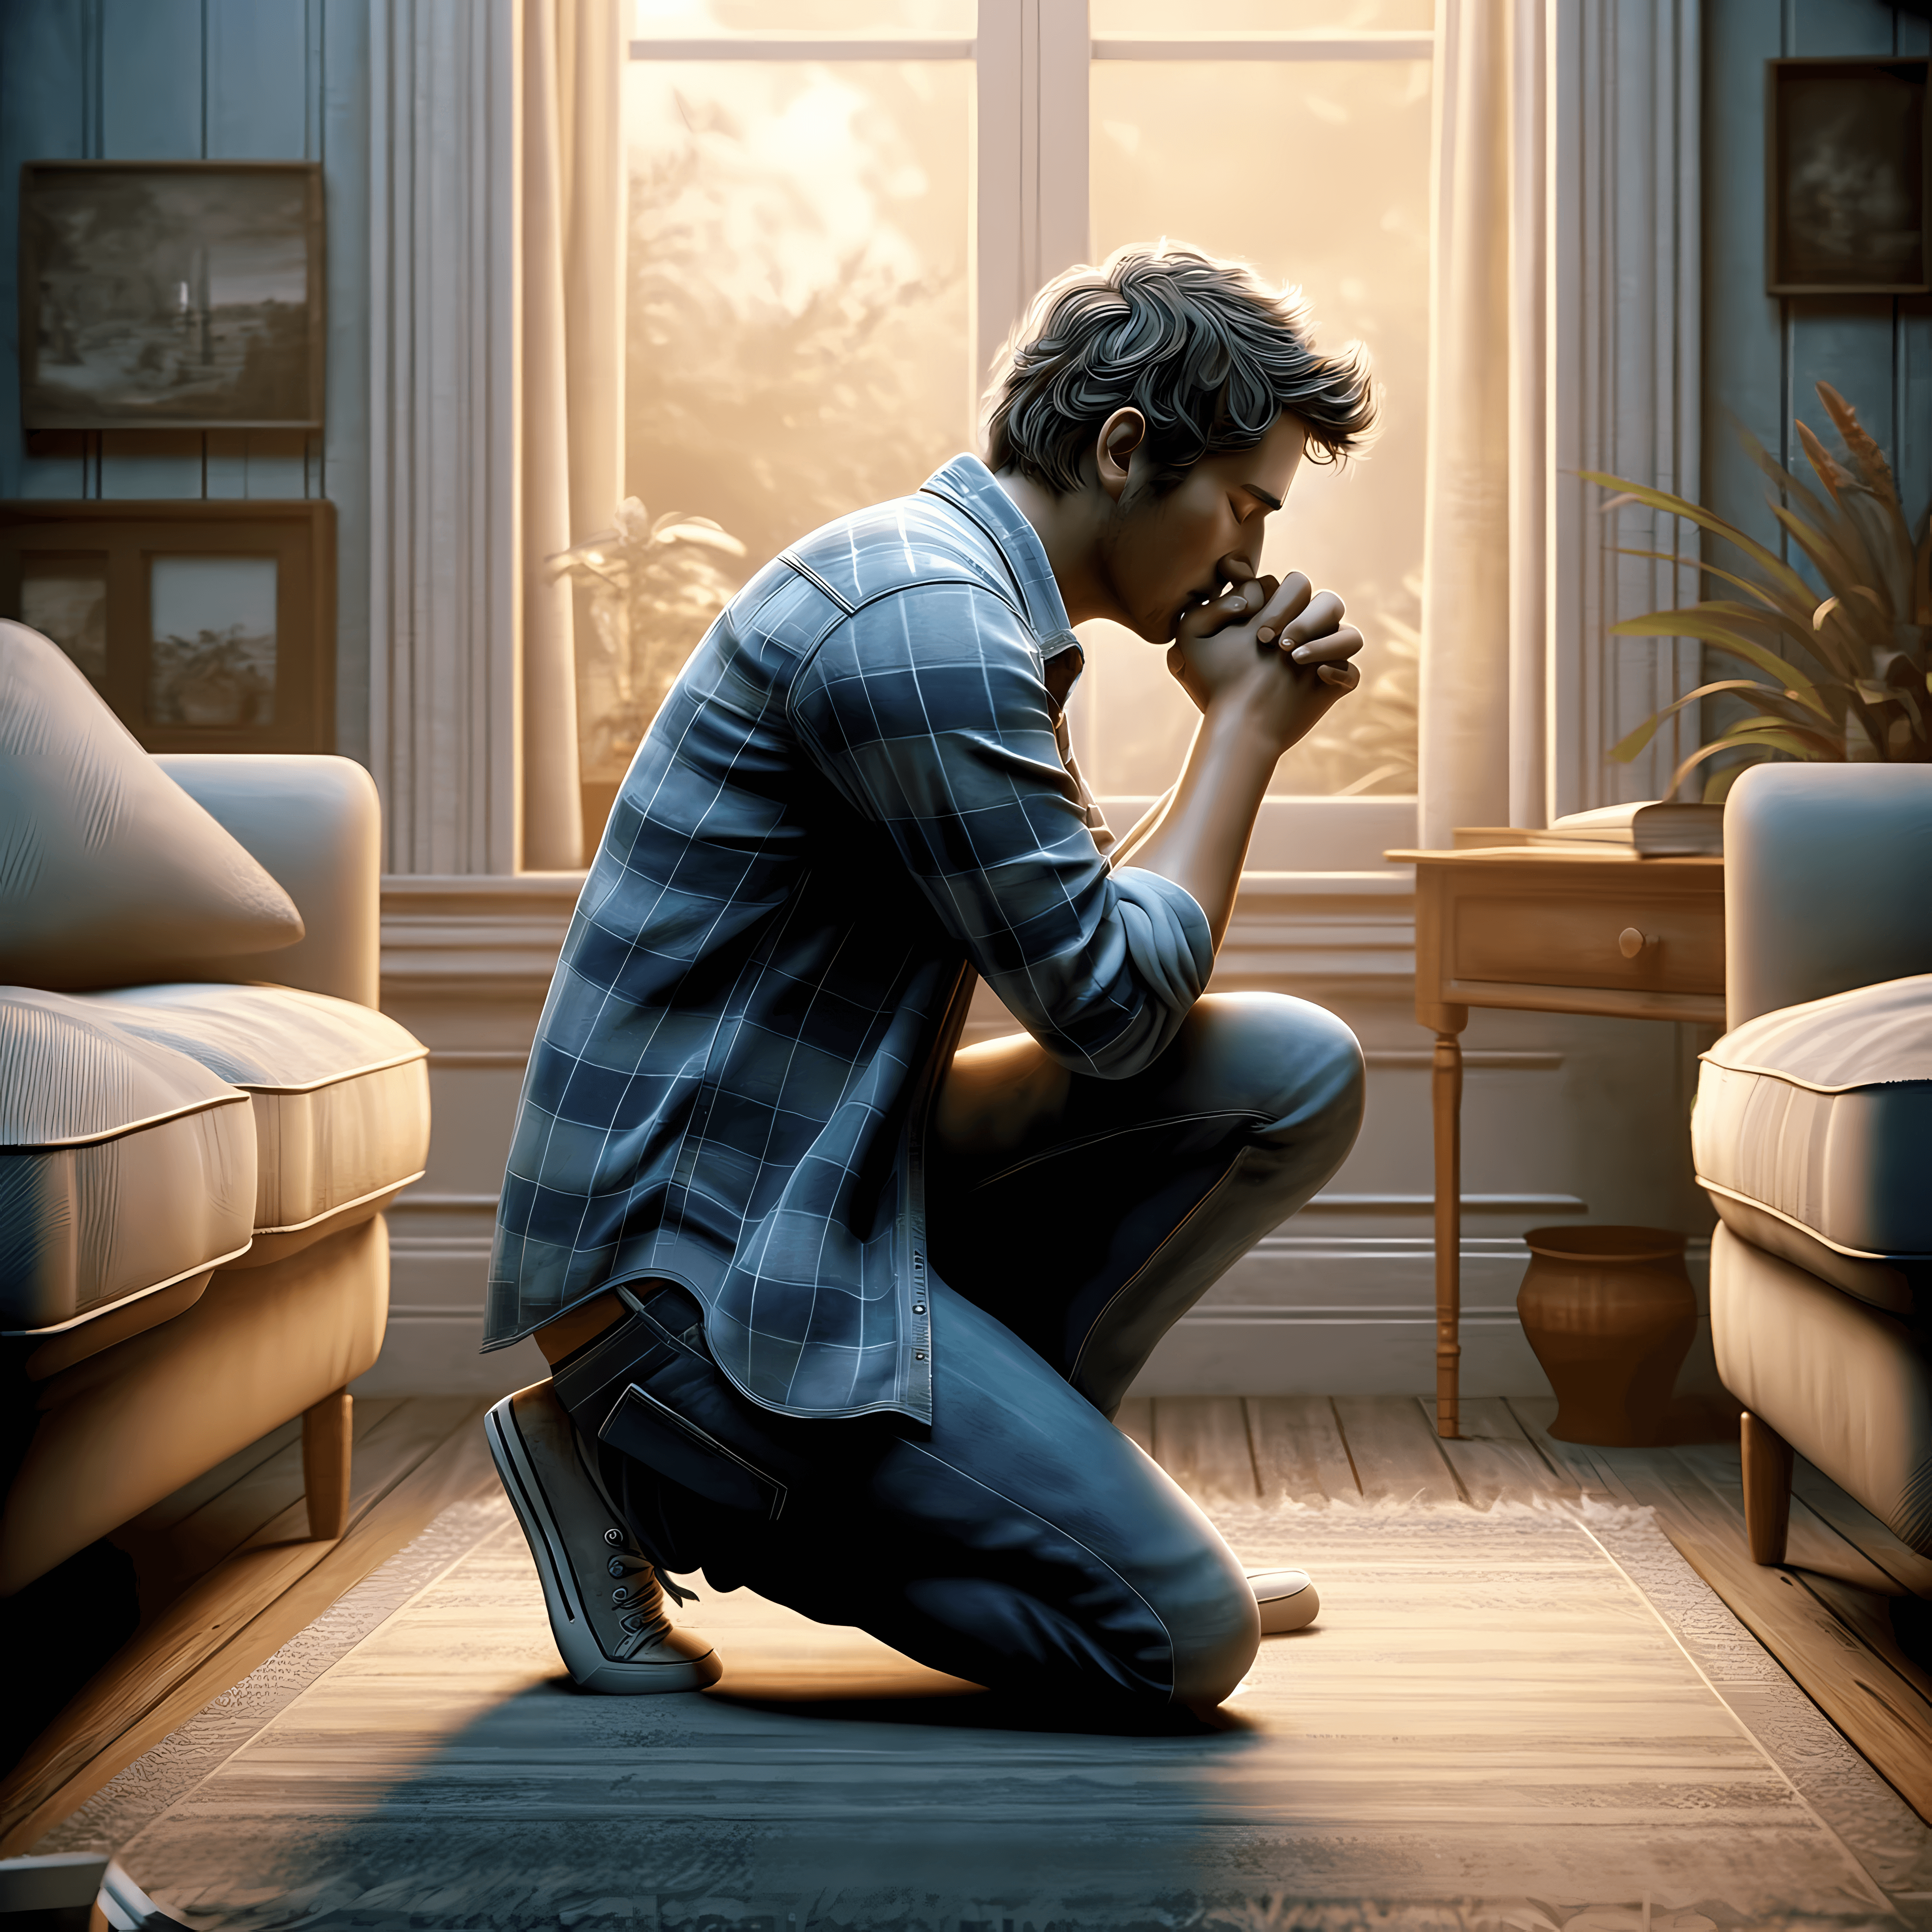 A digital depiction of a person in everyday, casual attire, and engaged in prayer